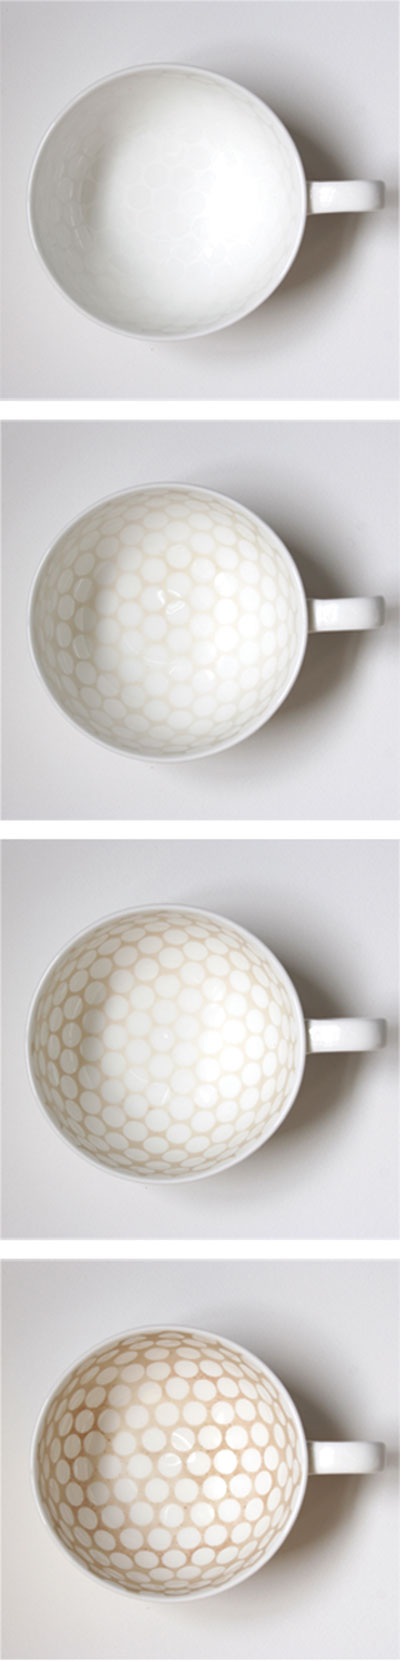 Bethan Laura Wood, Stain, with Spot pattern, hand-finished bone china, 2006.